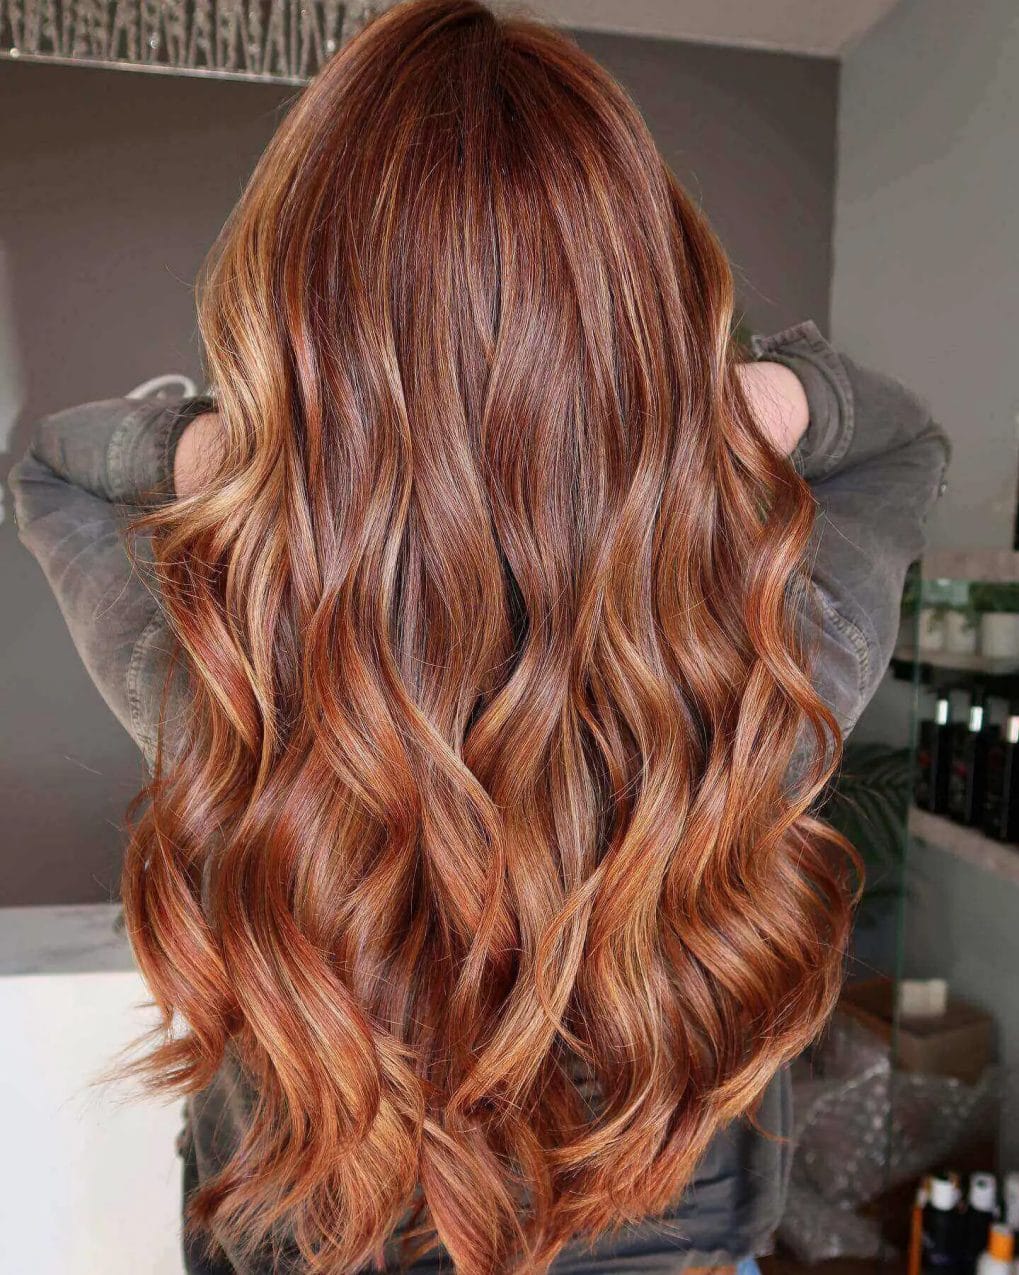 Mahogany waves with copper balayage and luxurious layers.